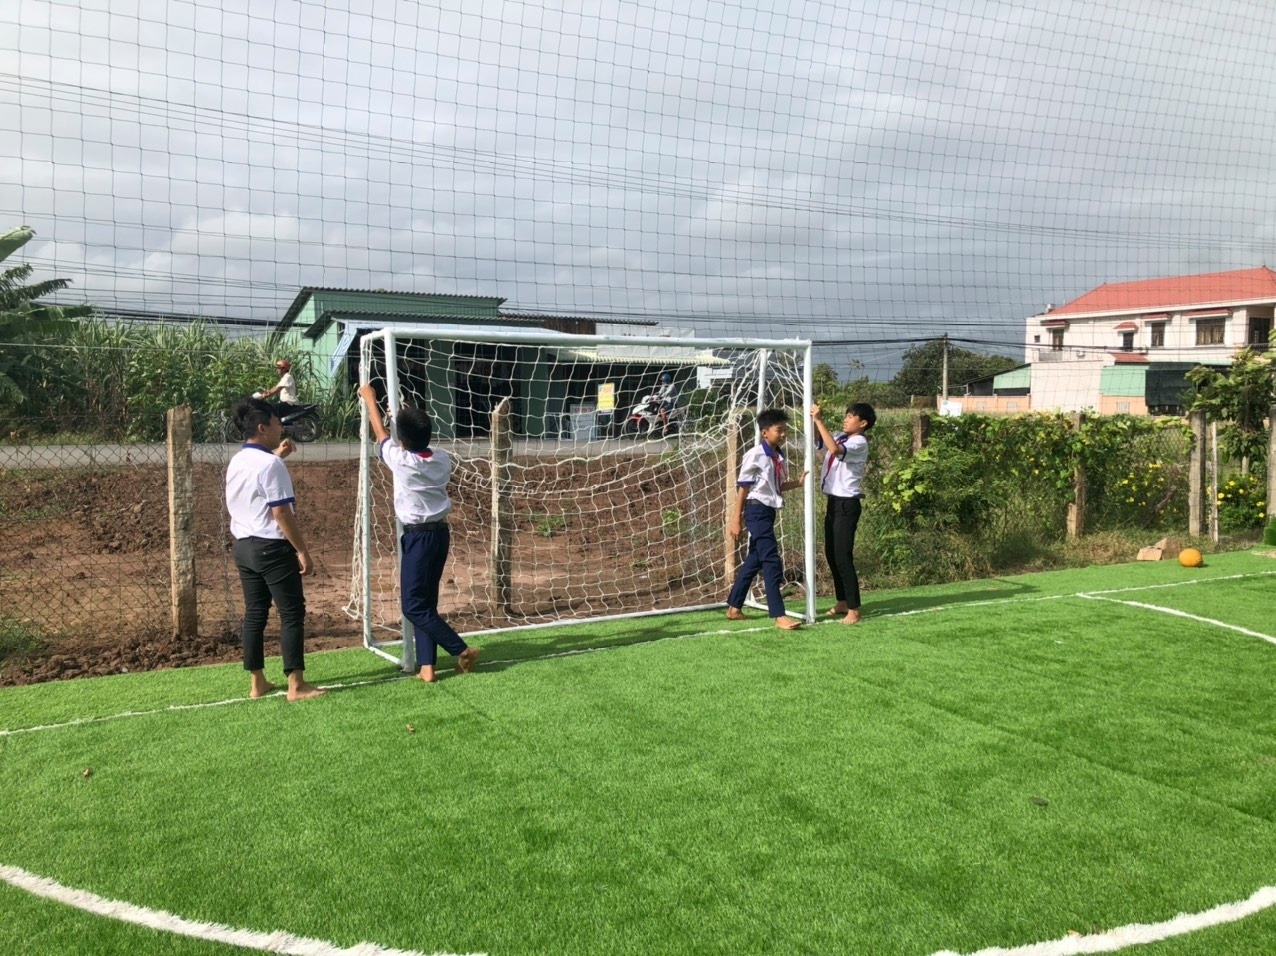 New football field opened for tien giang's district